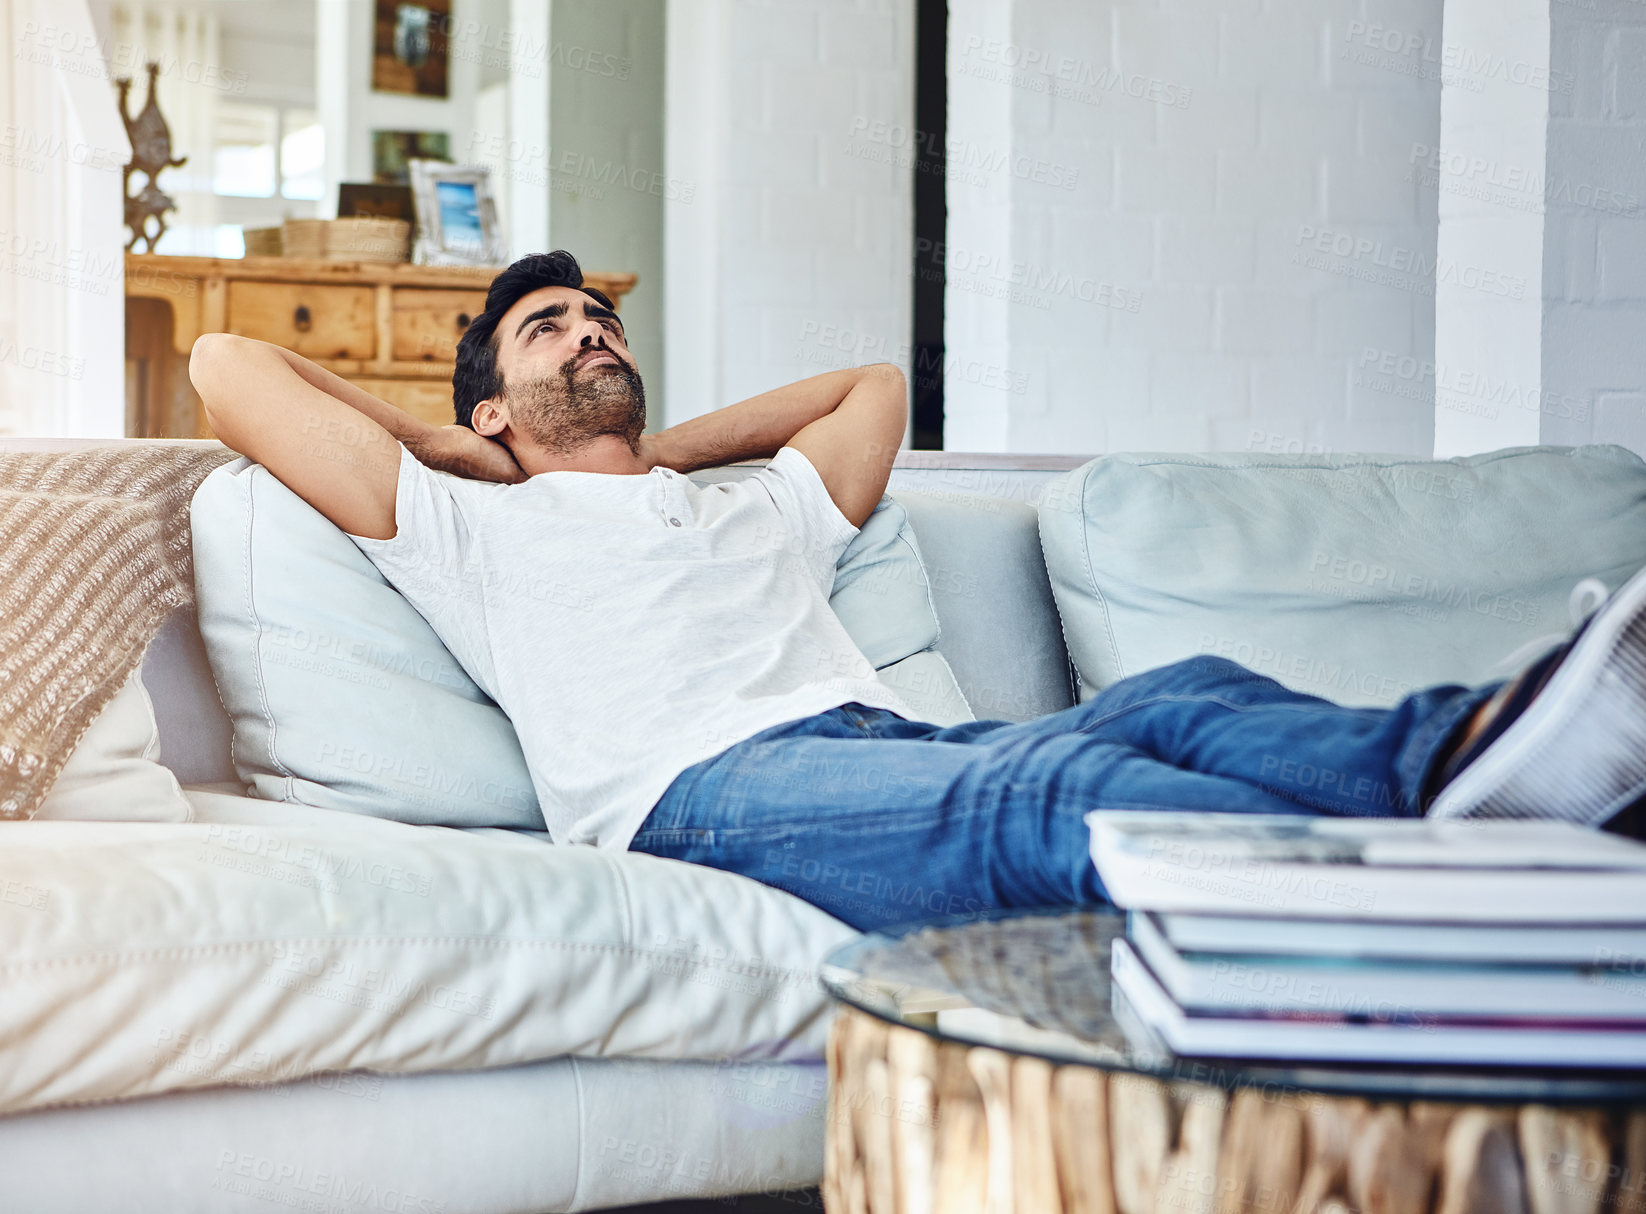 Buy stock photo Relax, lying and man on couch for leisure, peaceful and weekend break in living room. Lazy Saturday, calm and male person with arms out on couch for cozy, comfortable rest or chill day off in home